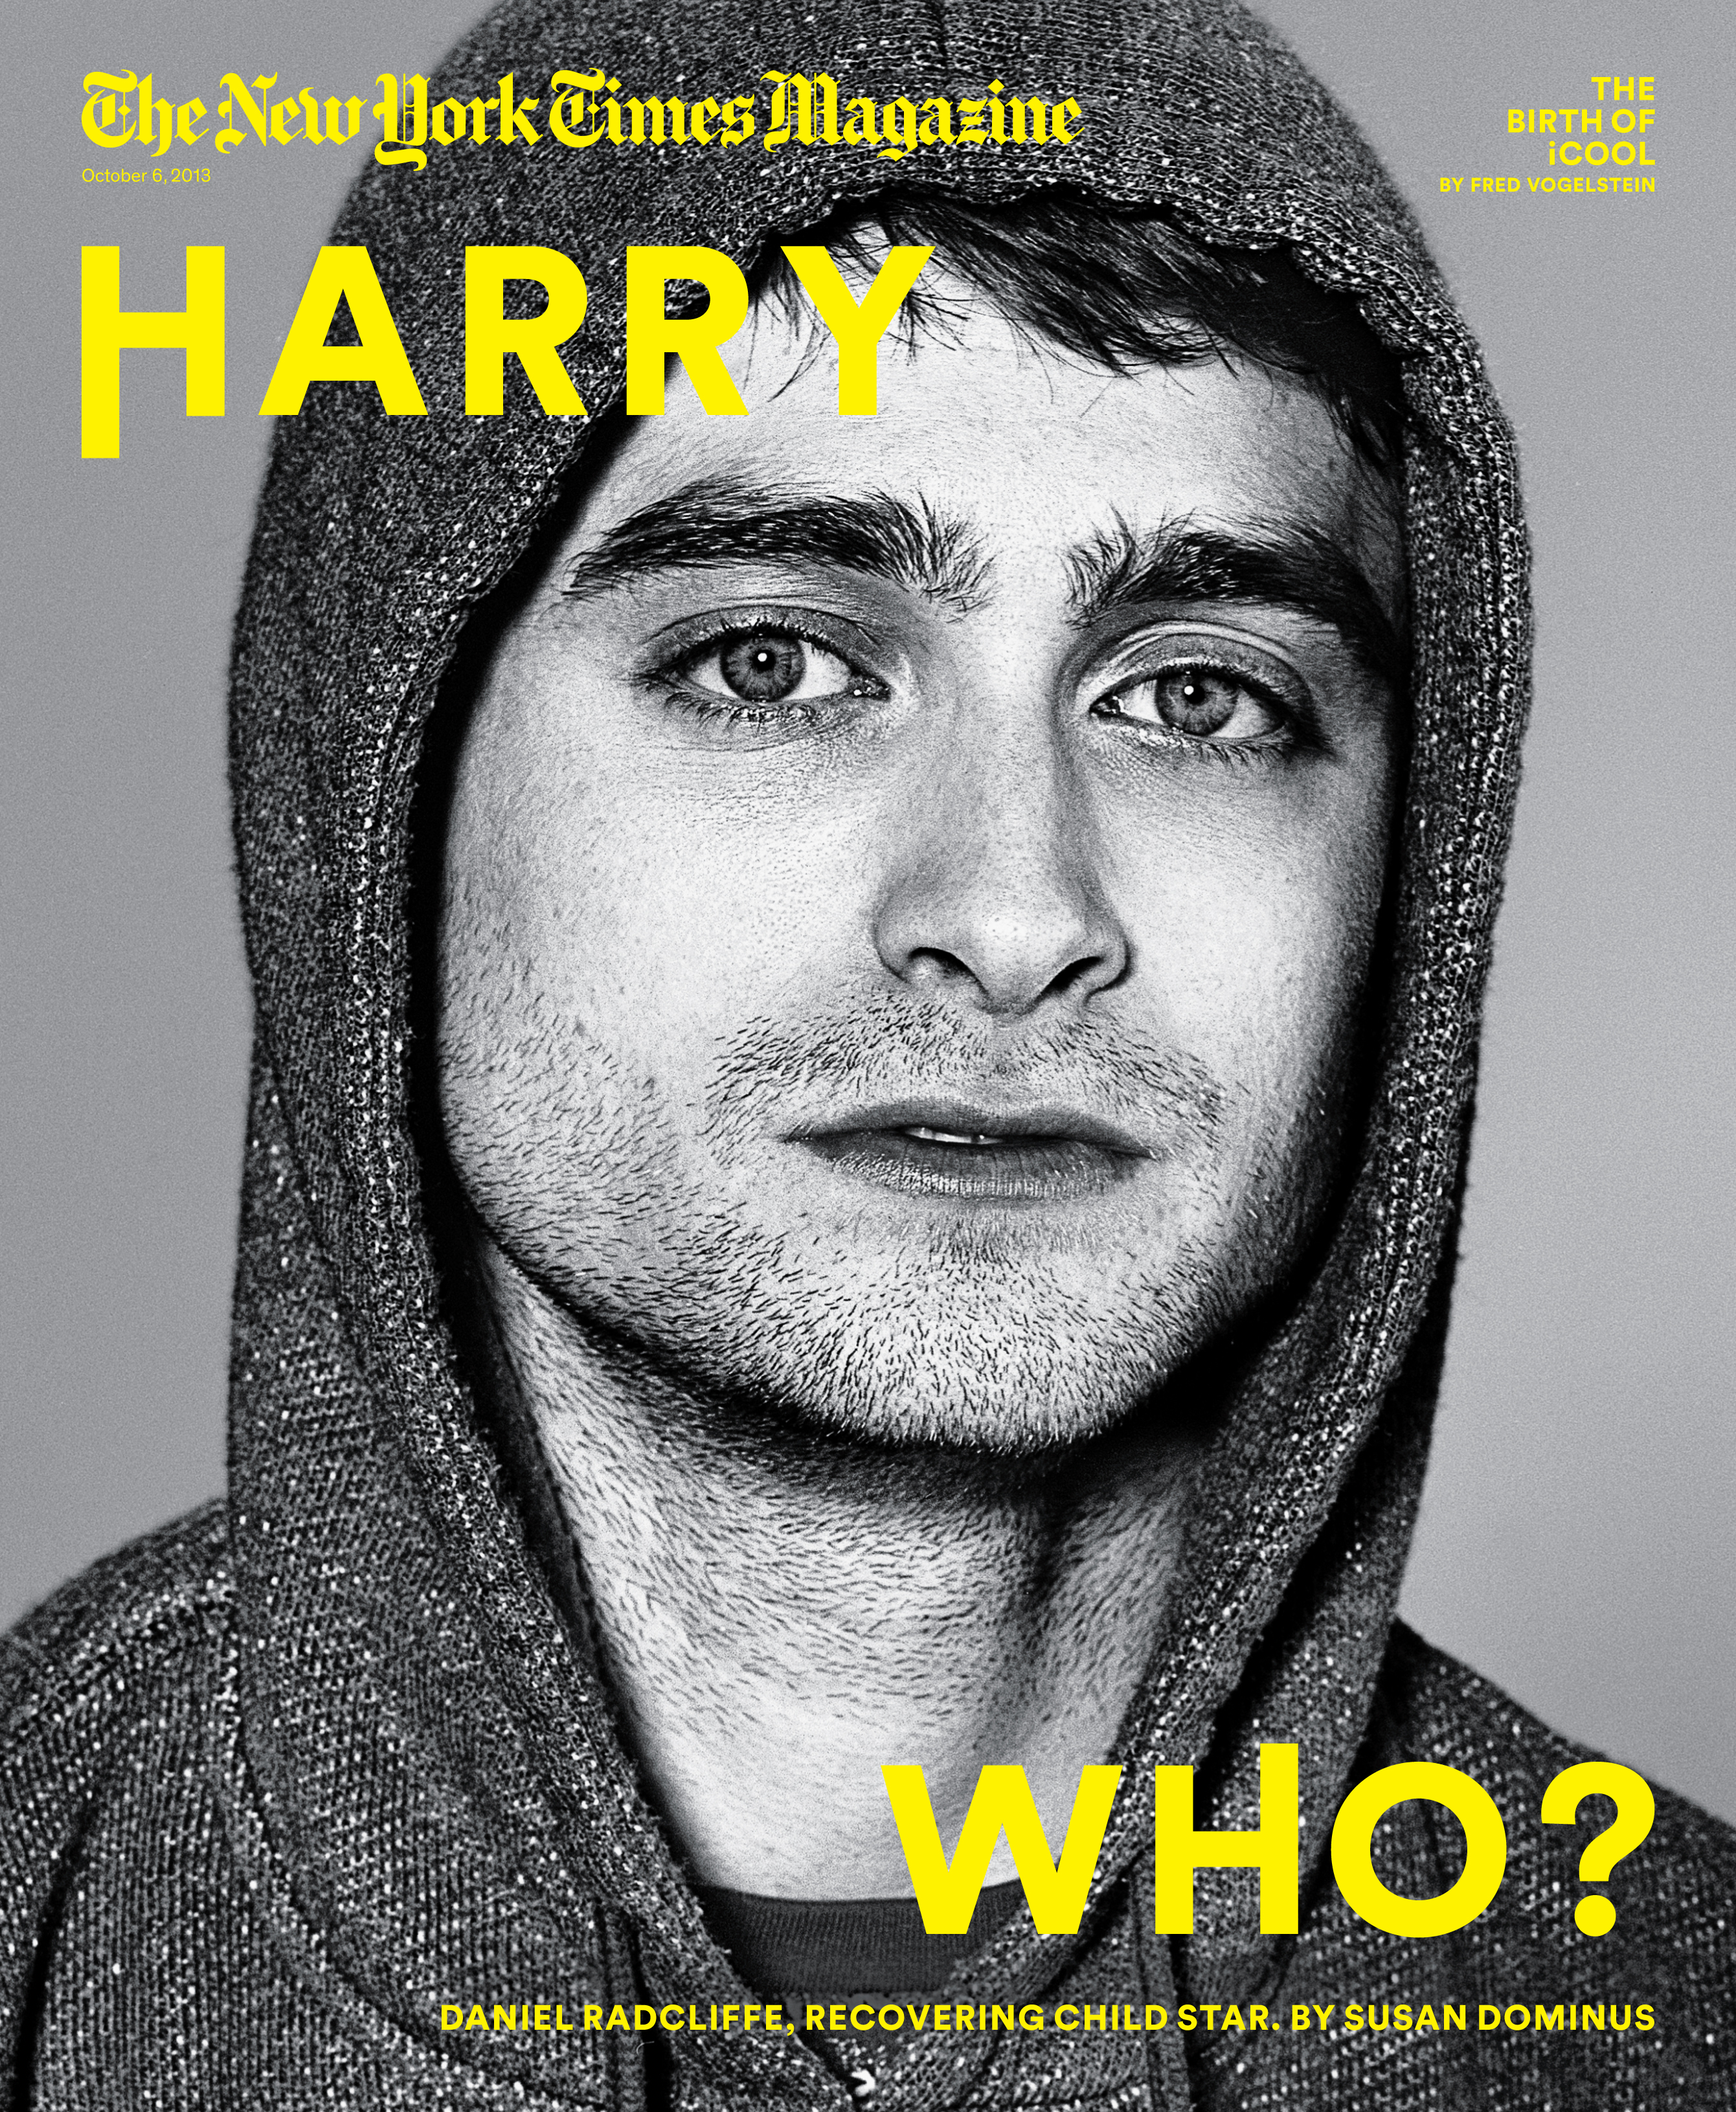 The New York Times Magazine-October 6, "Harry Who?"